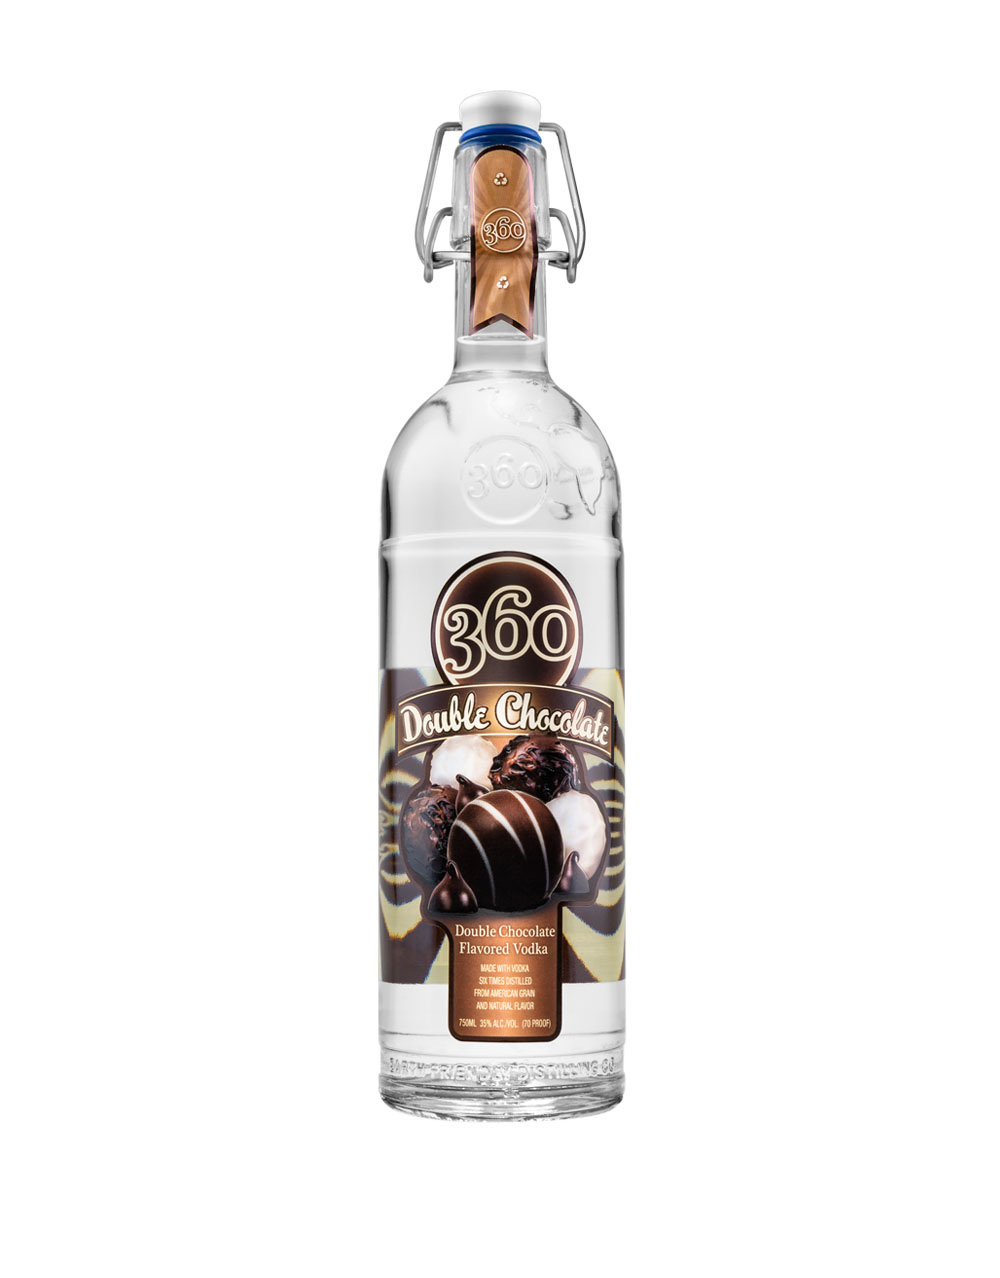 Absolut Elyx in Copper Musical Tin